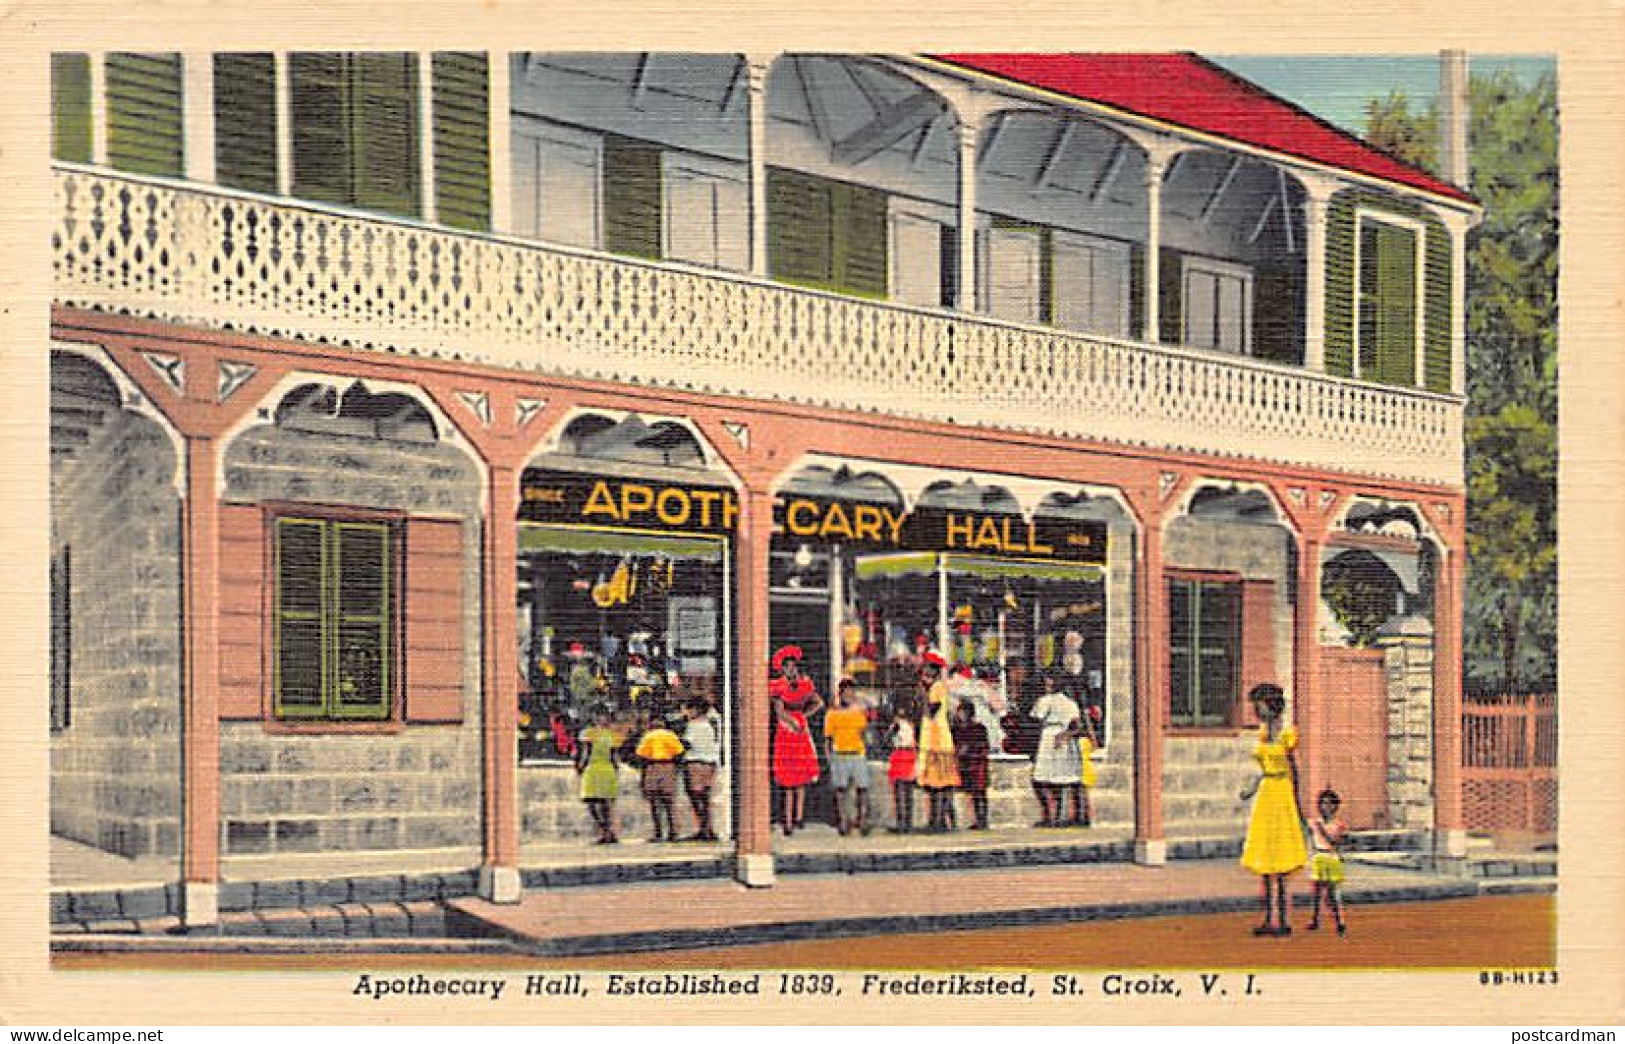 U.S. Virgin Islands - ST. CROIX - Frederiksted - Apothecary Hall - Publ. Schade's Series  - Virgin Islands, US